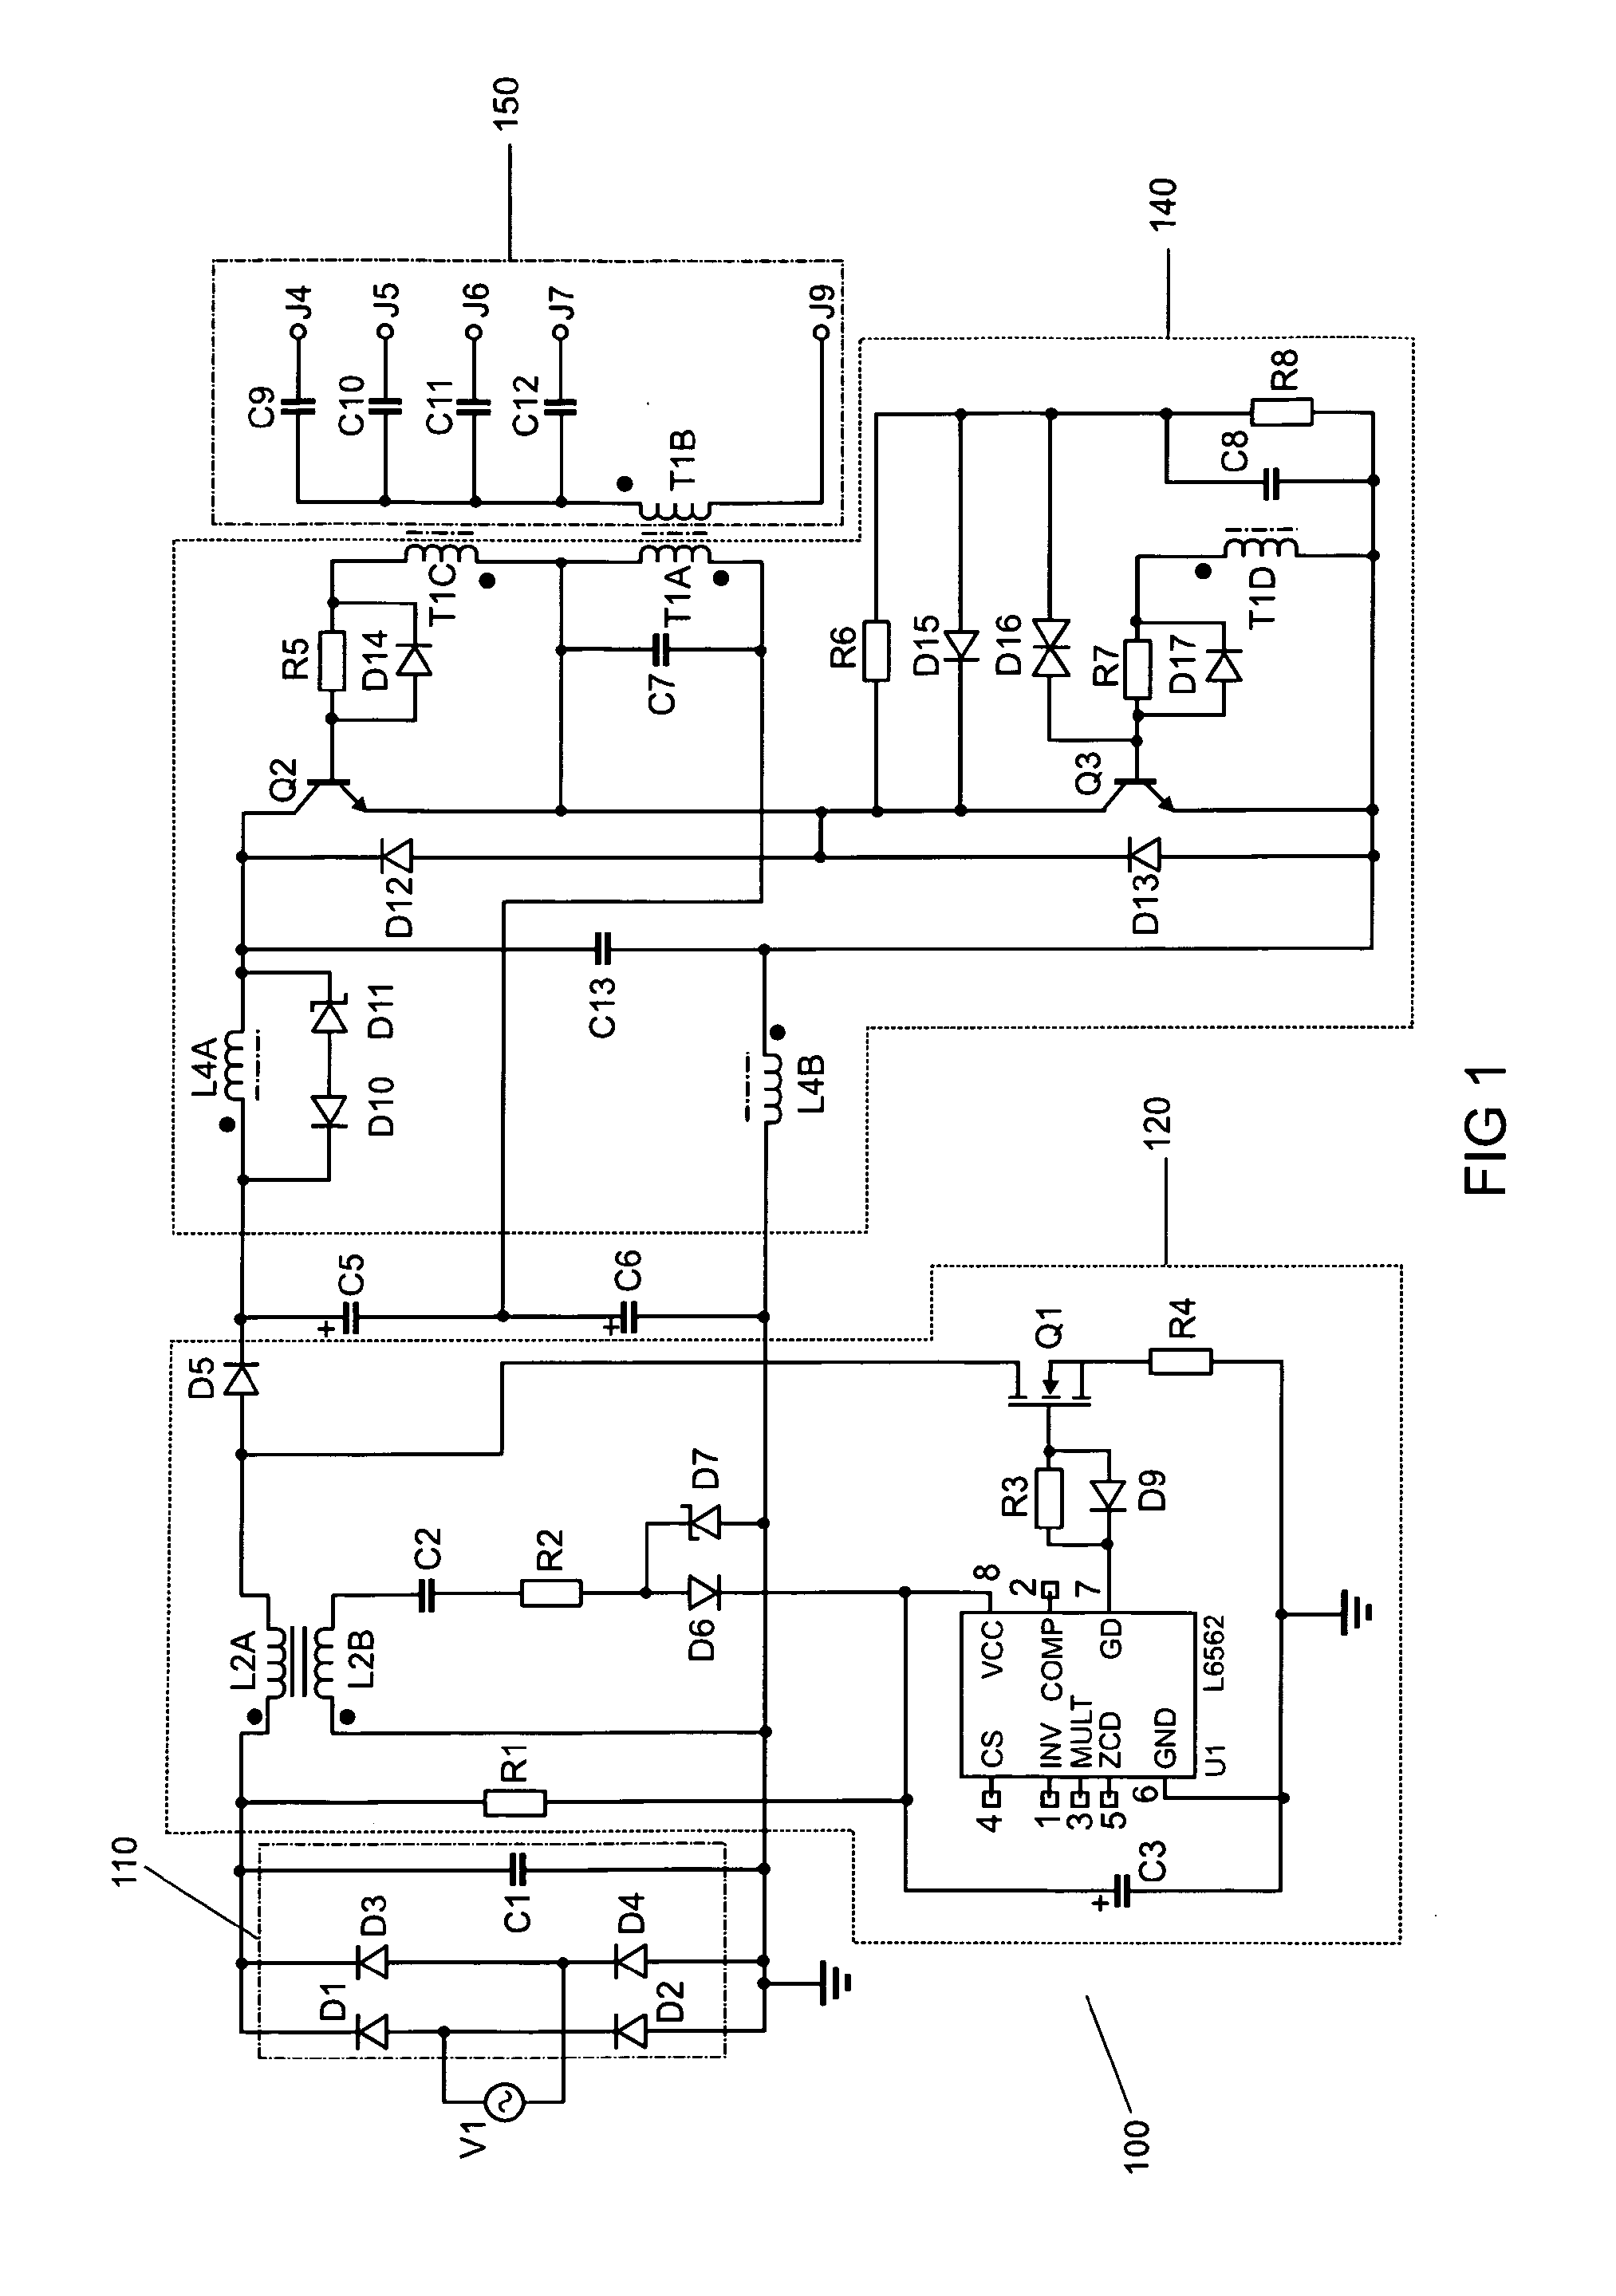 Electronic ballast for lighting unit and lighting apparatus